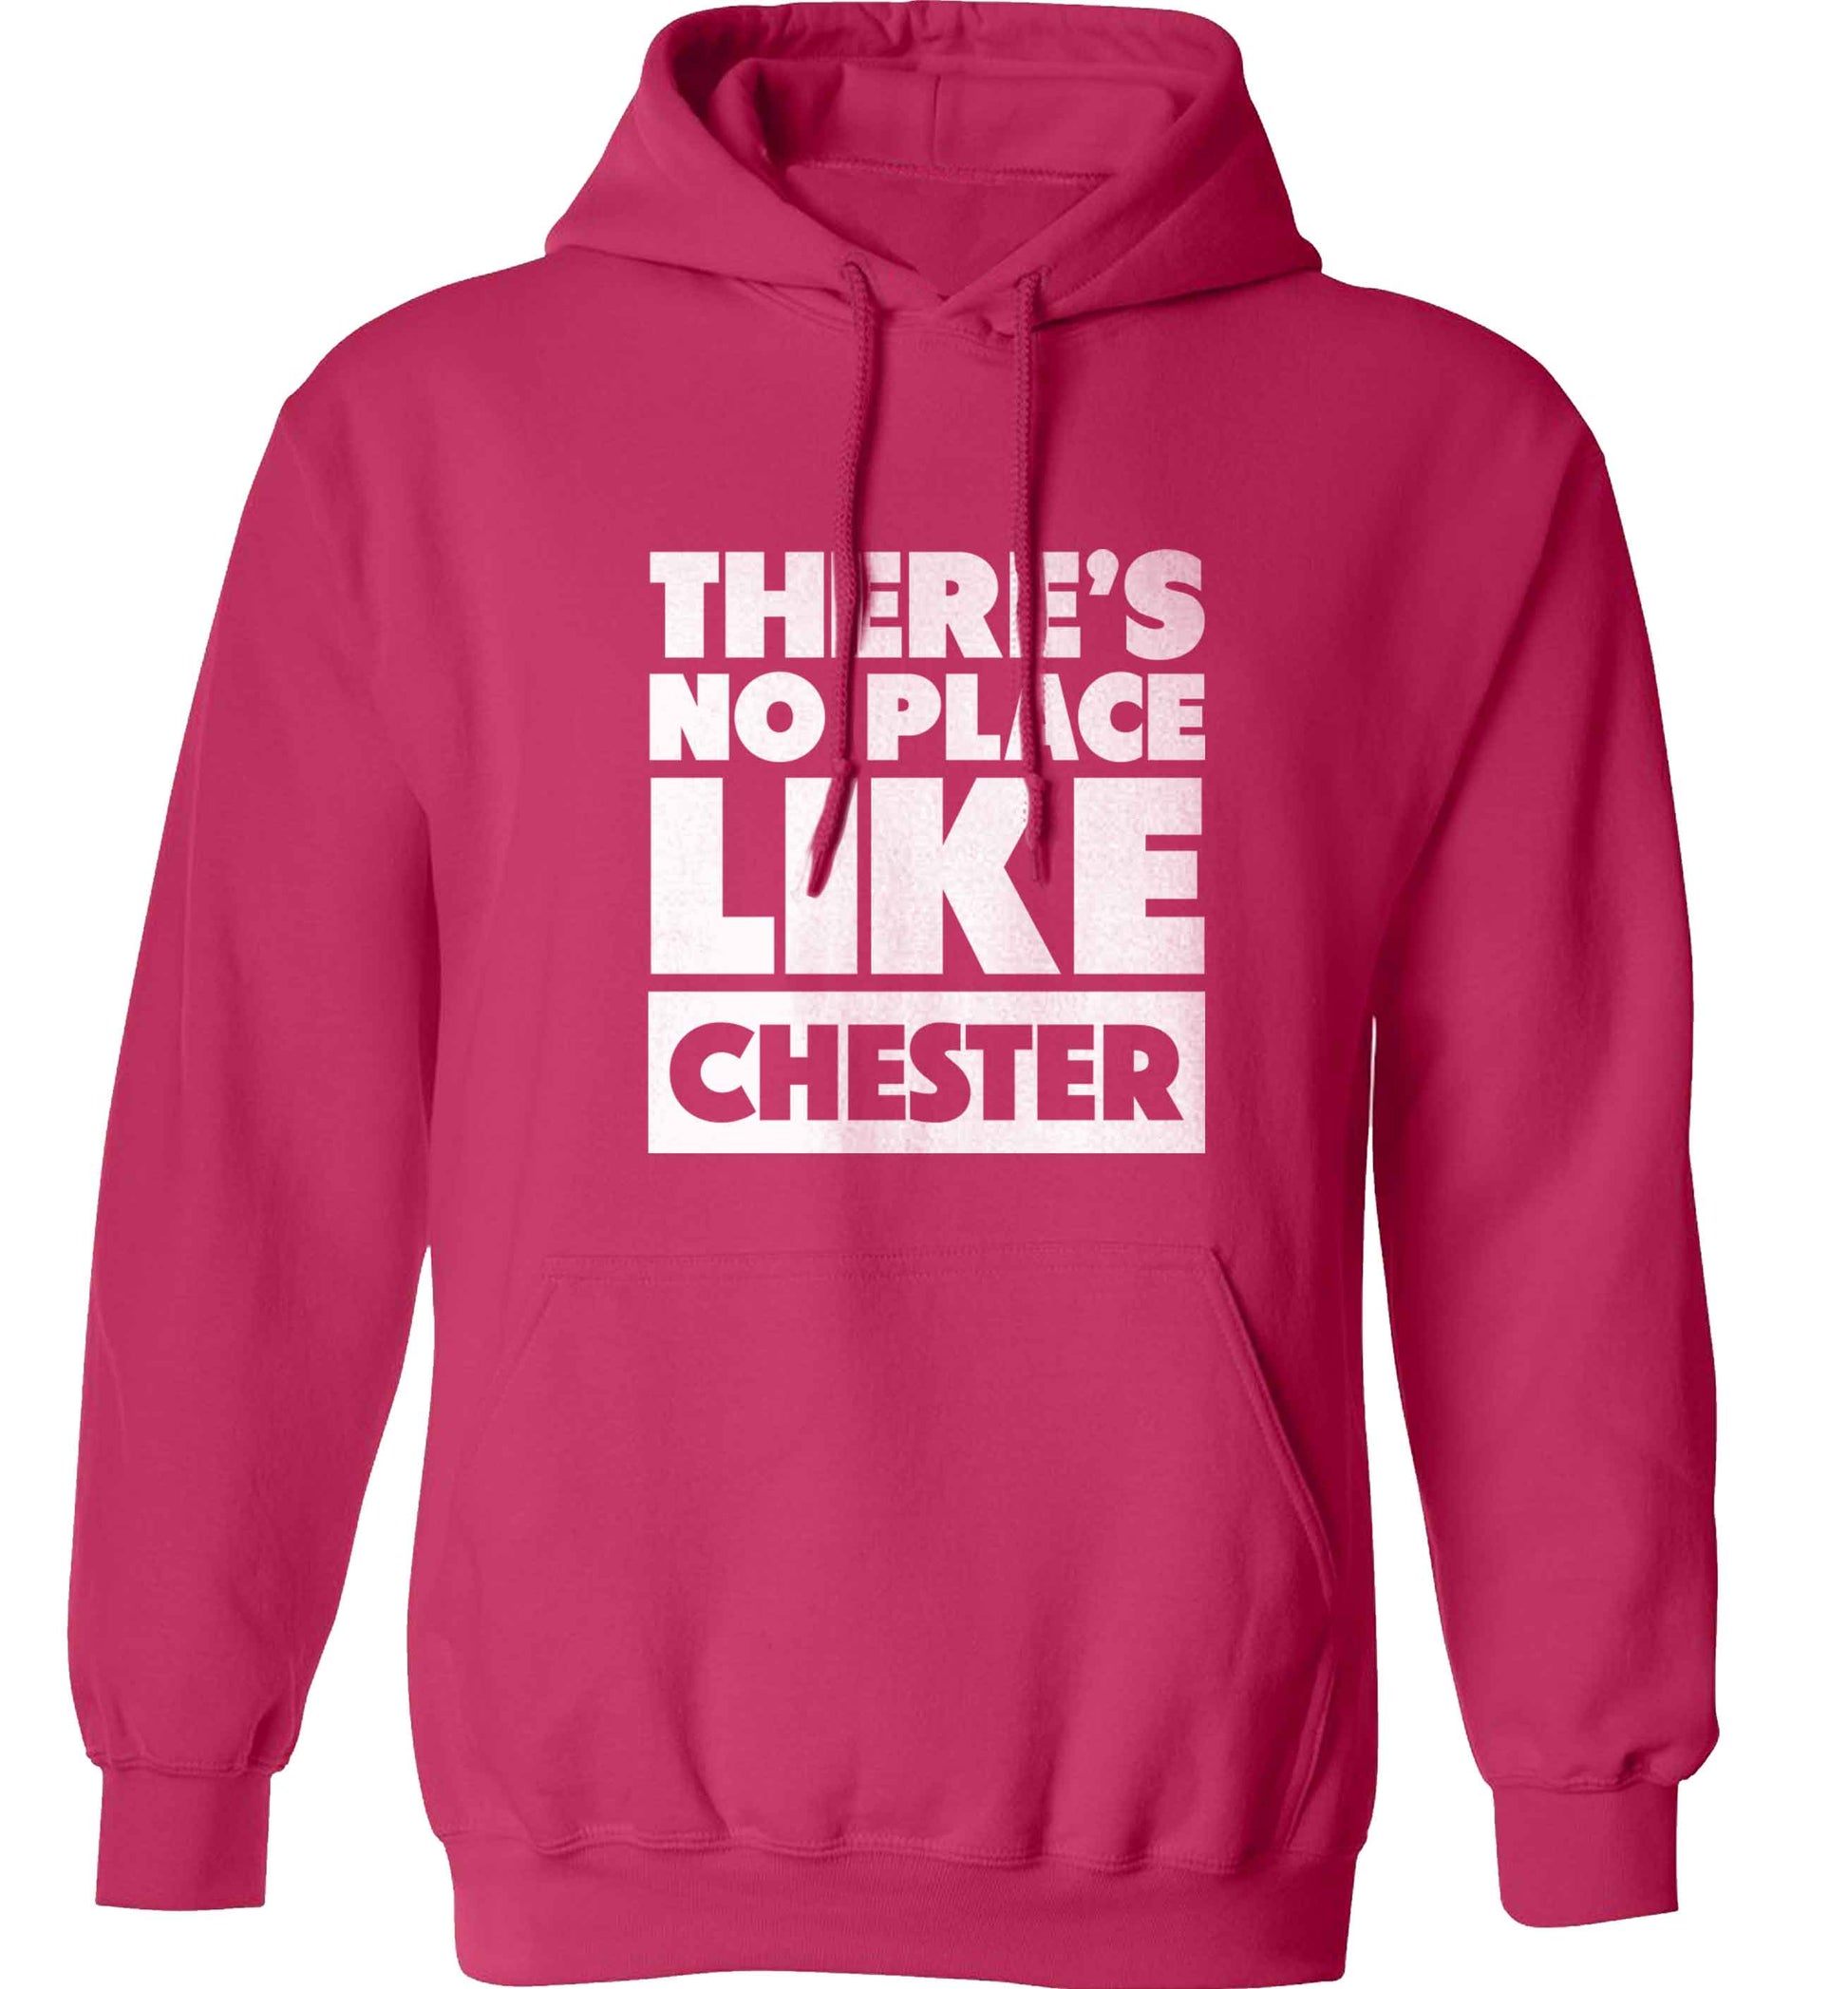 There's no place like Chester adults unisex pink hoodie 2XL